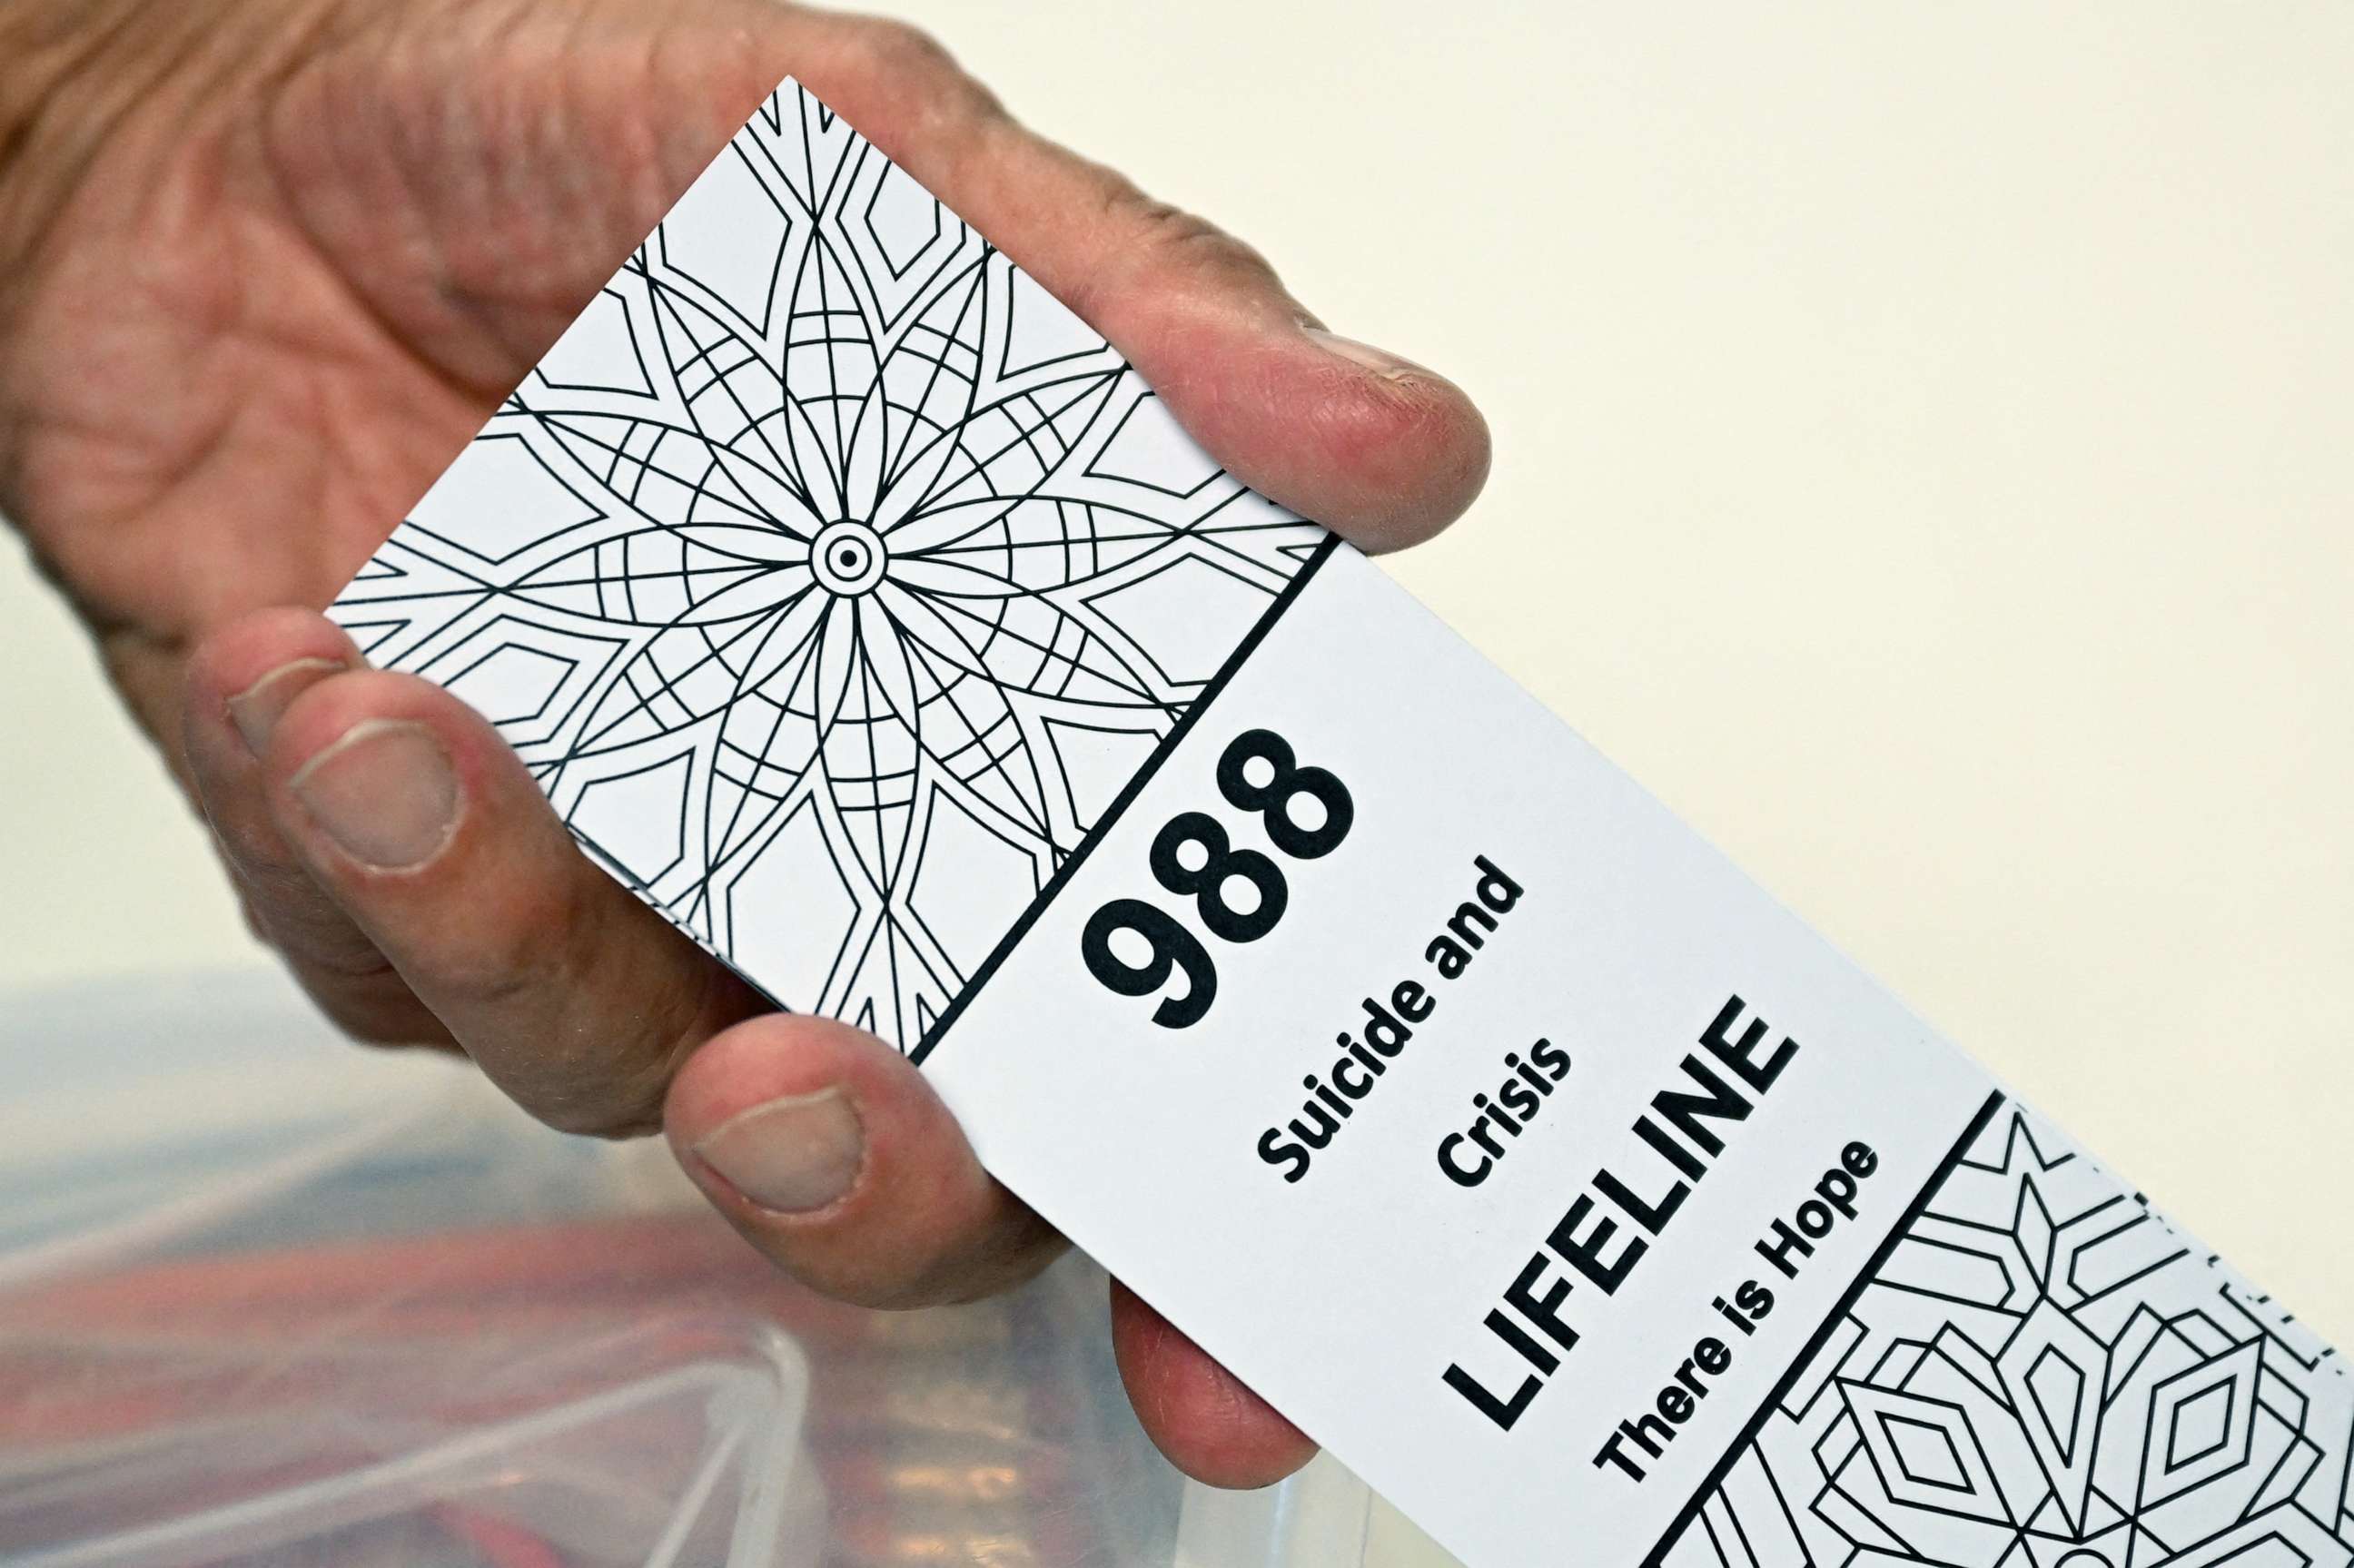 PHOTO: A bookmark for children with the 988 suicide and crisis lifeline emergency telephone number is displayed by Lance Neiberger while they speak about mental health and suicide awareness in Casper, Wy., Aug. 14, 2022.